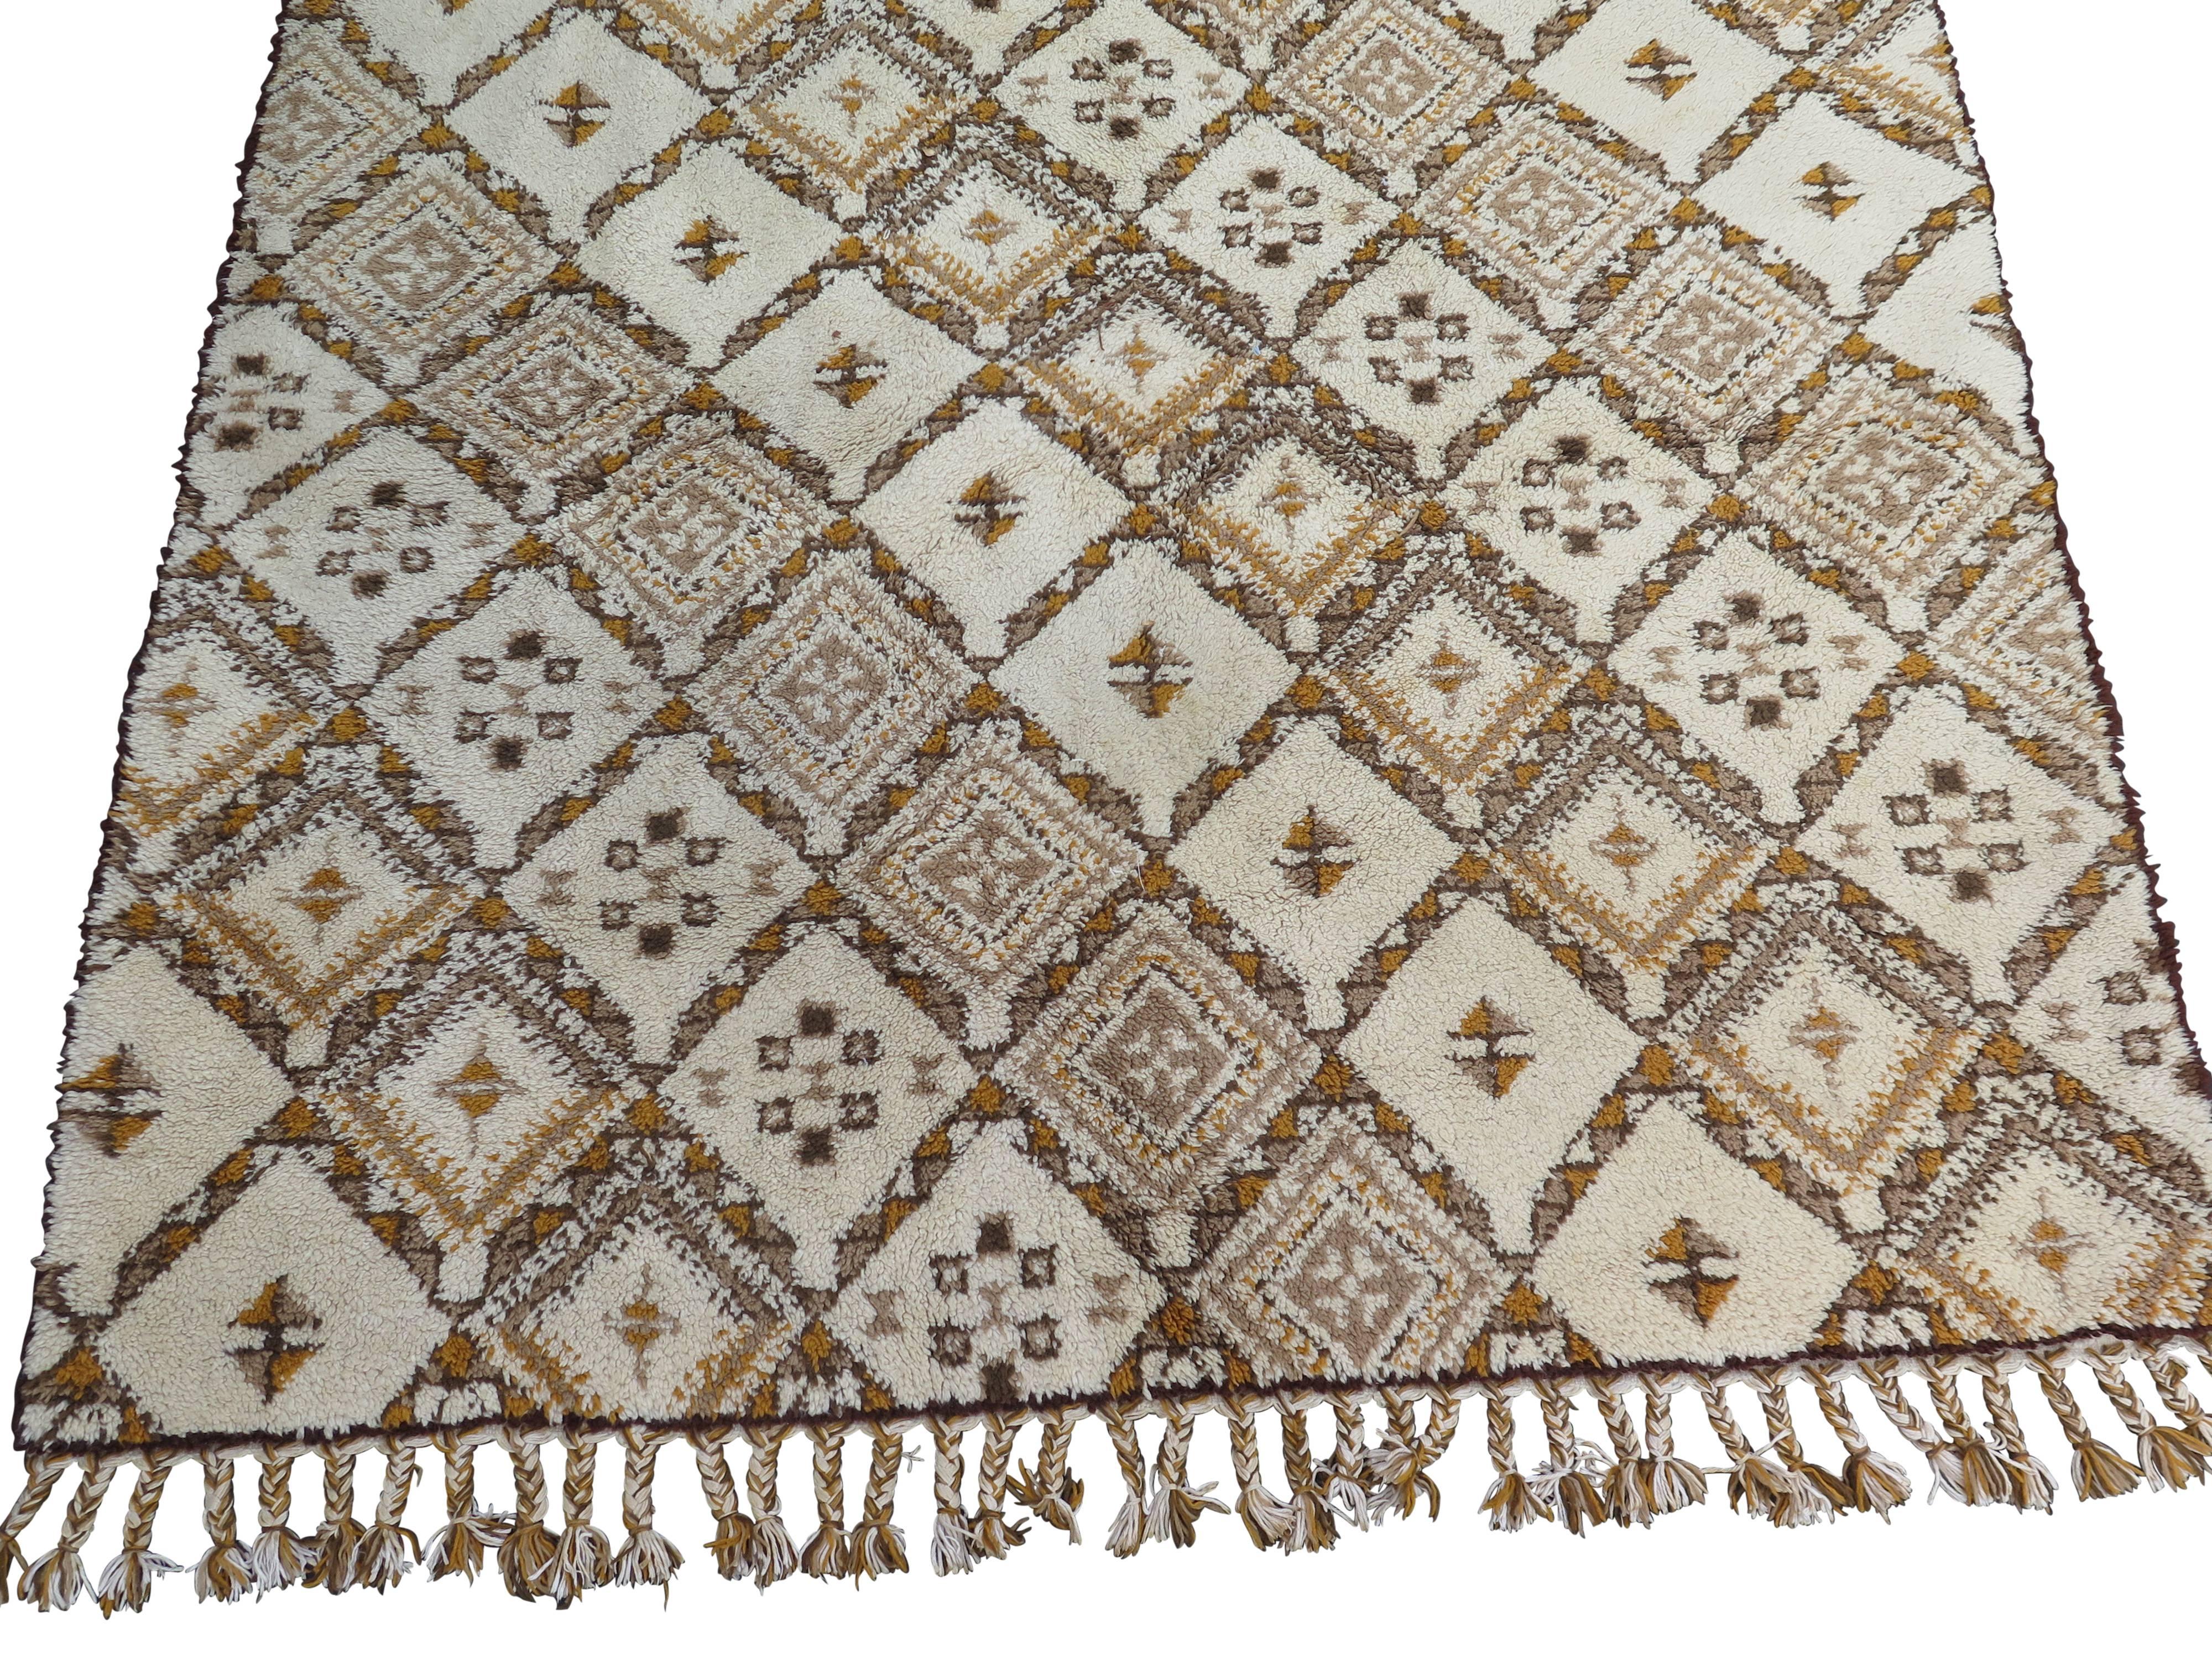 Beautiful nomadic rug, likely made in the 1940s-1950s. White with earth tone geometric patterns and beautiful braided tassels.